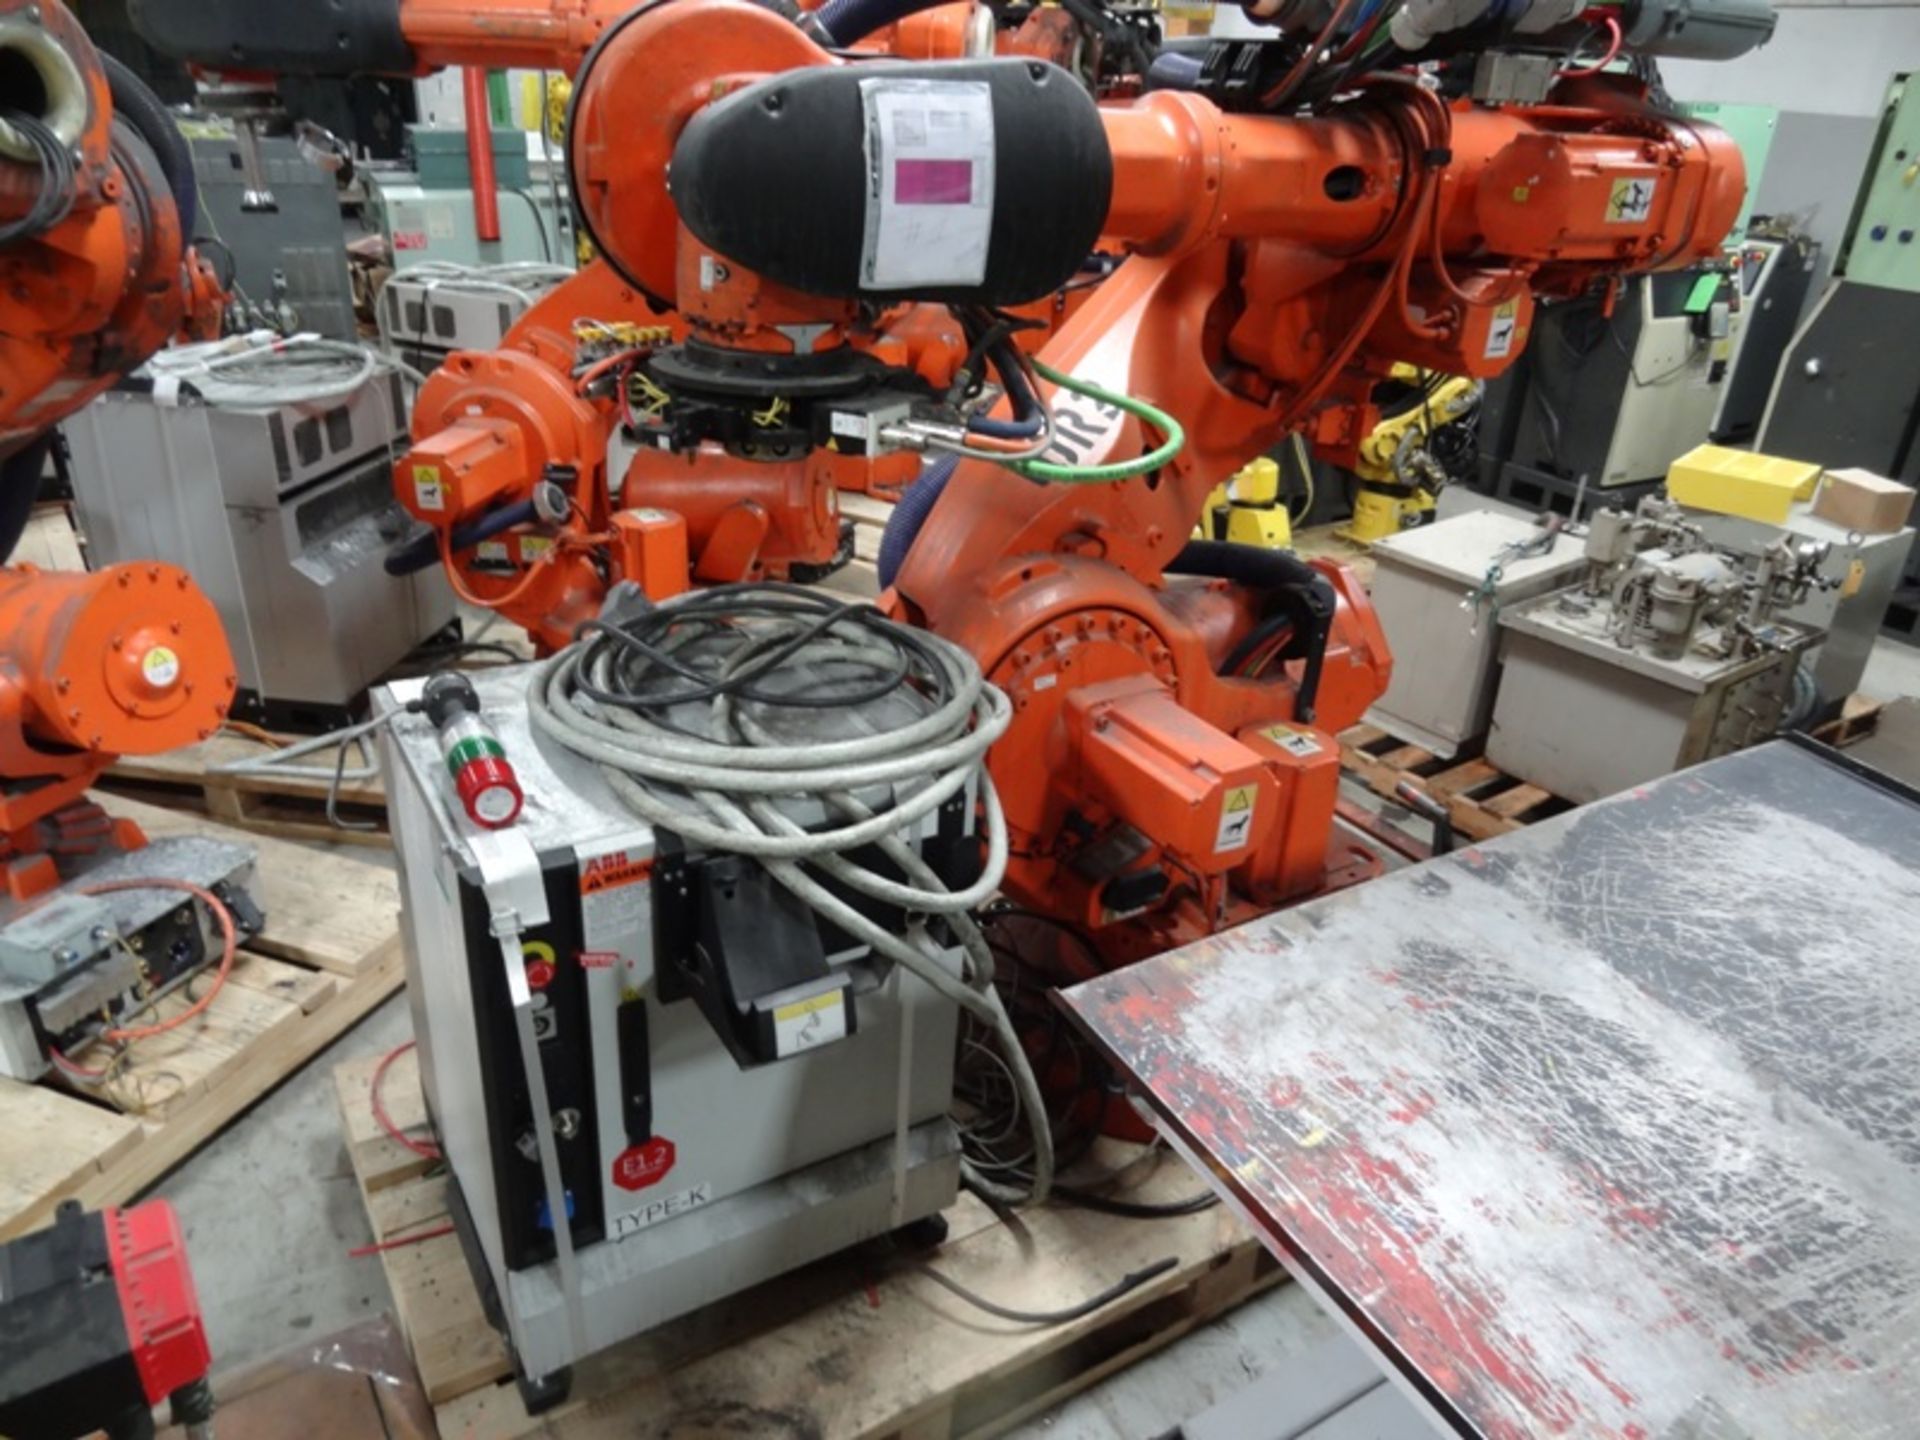 ABB ROBOT IRB 7600-340/2.8 WITH IRC 5 CONTROLS, CABLES & TEACH, YEAR 2012, SM 76-65309, LOCATION MI